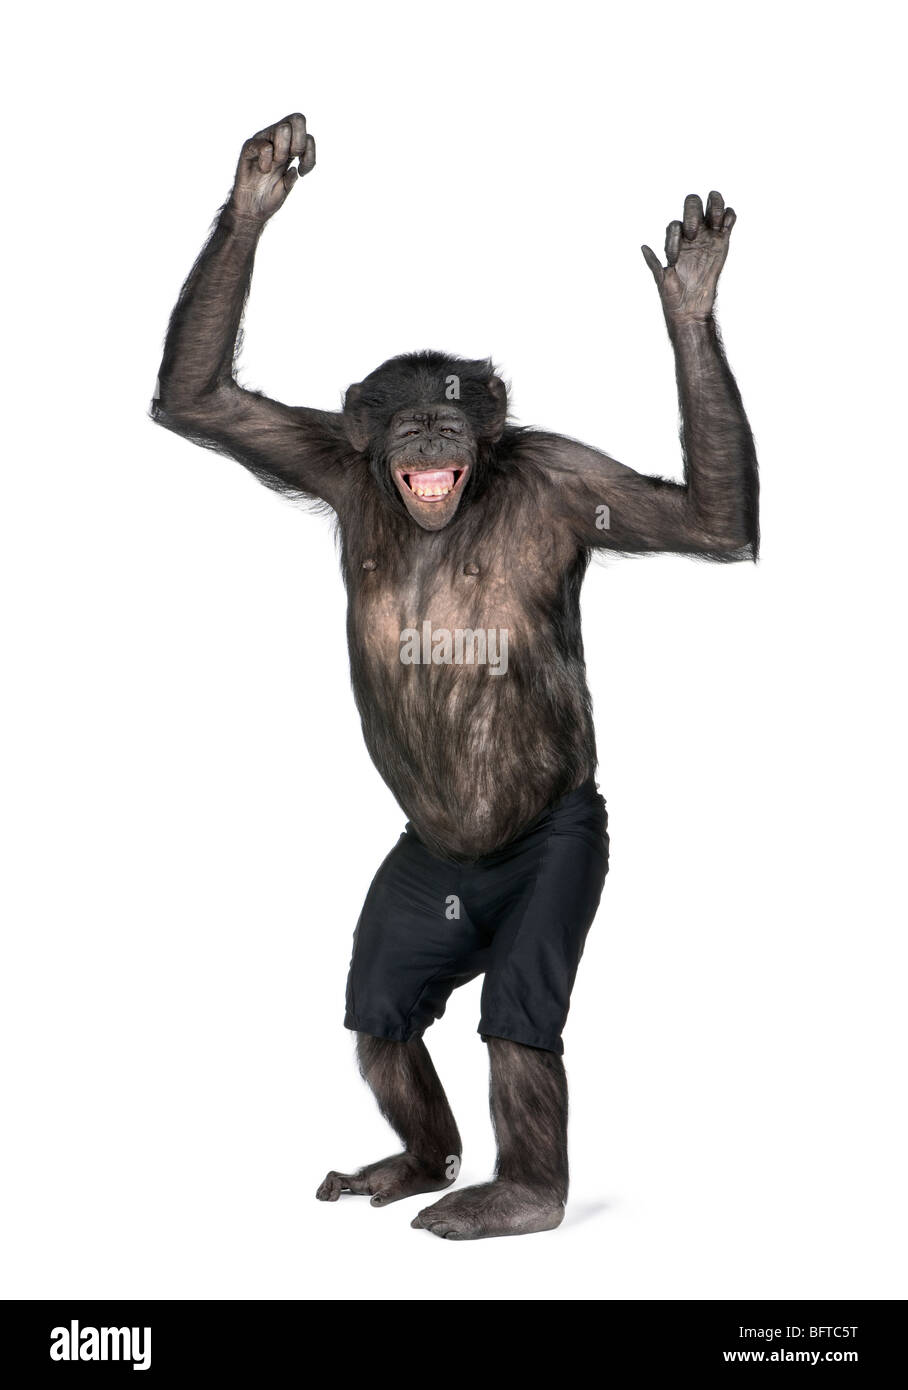 Cheerful Chimpanzee with arms raised standing in front of white background, studio shot Stock Photo